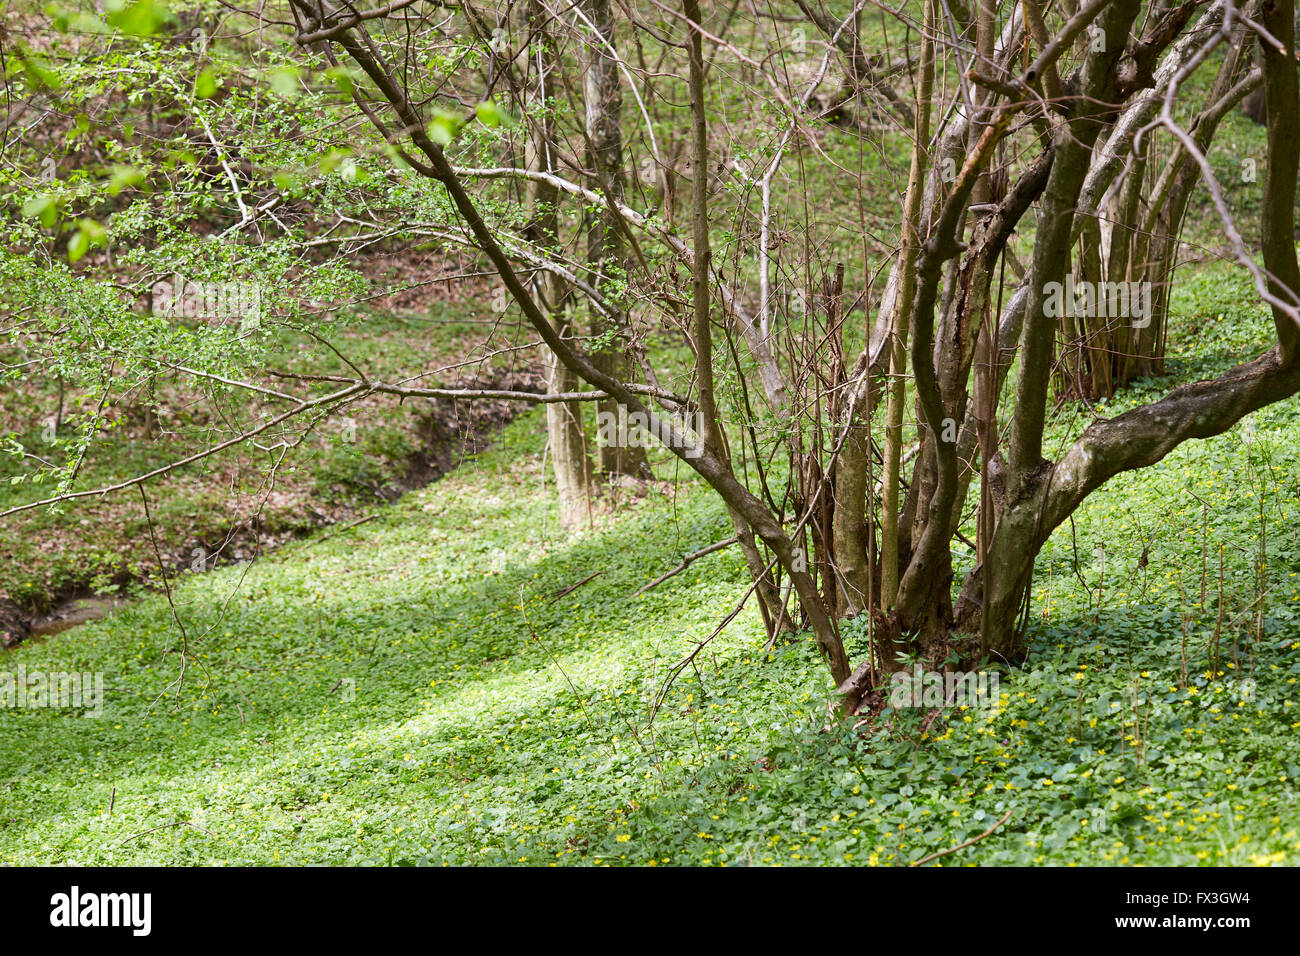 A small celandine field in the forest among trees Stock Photo